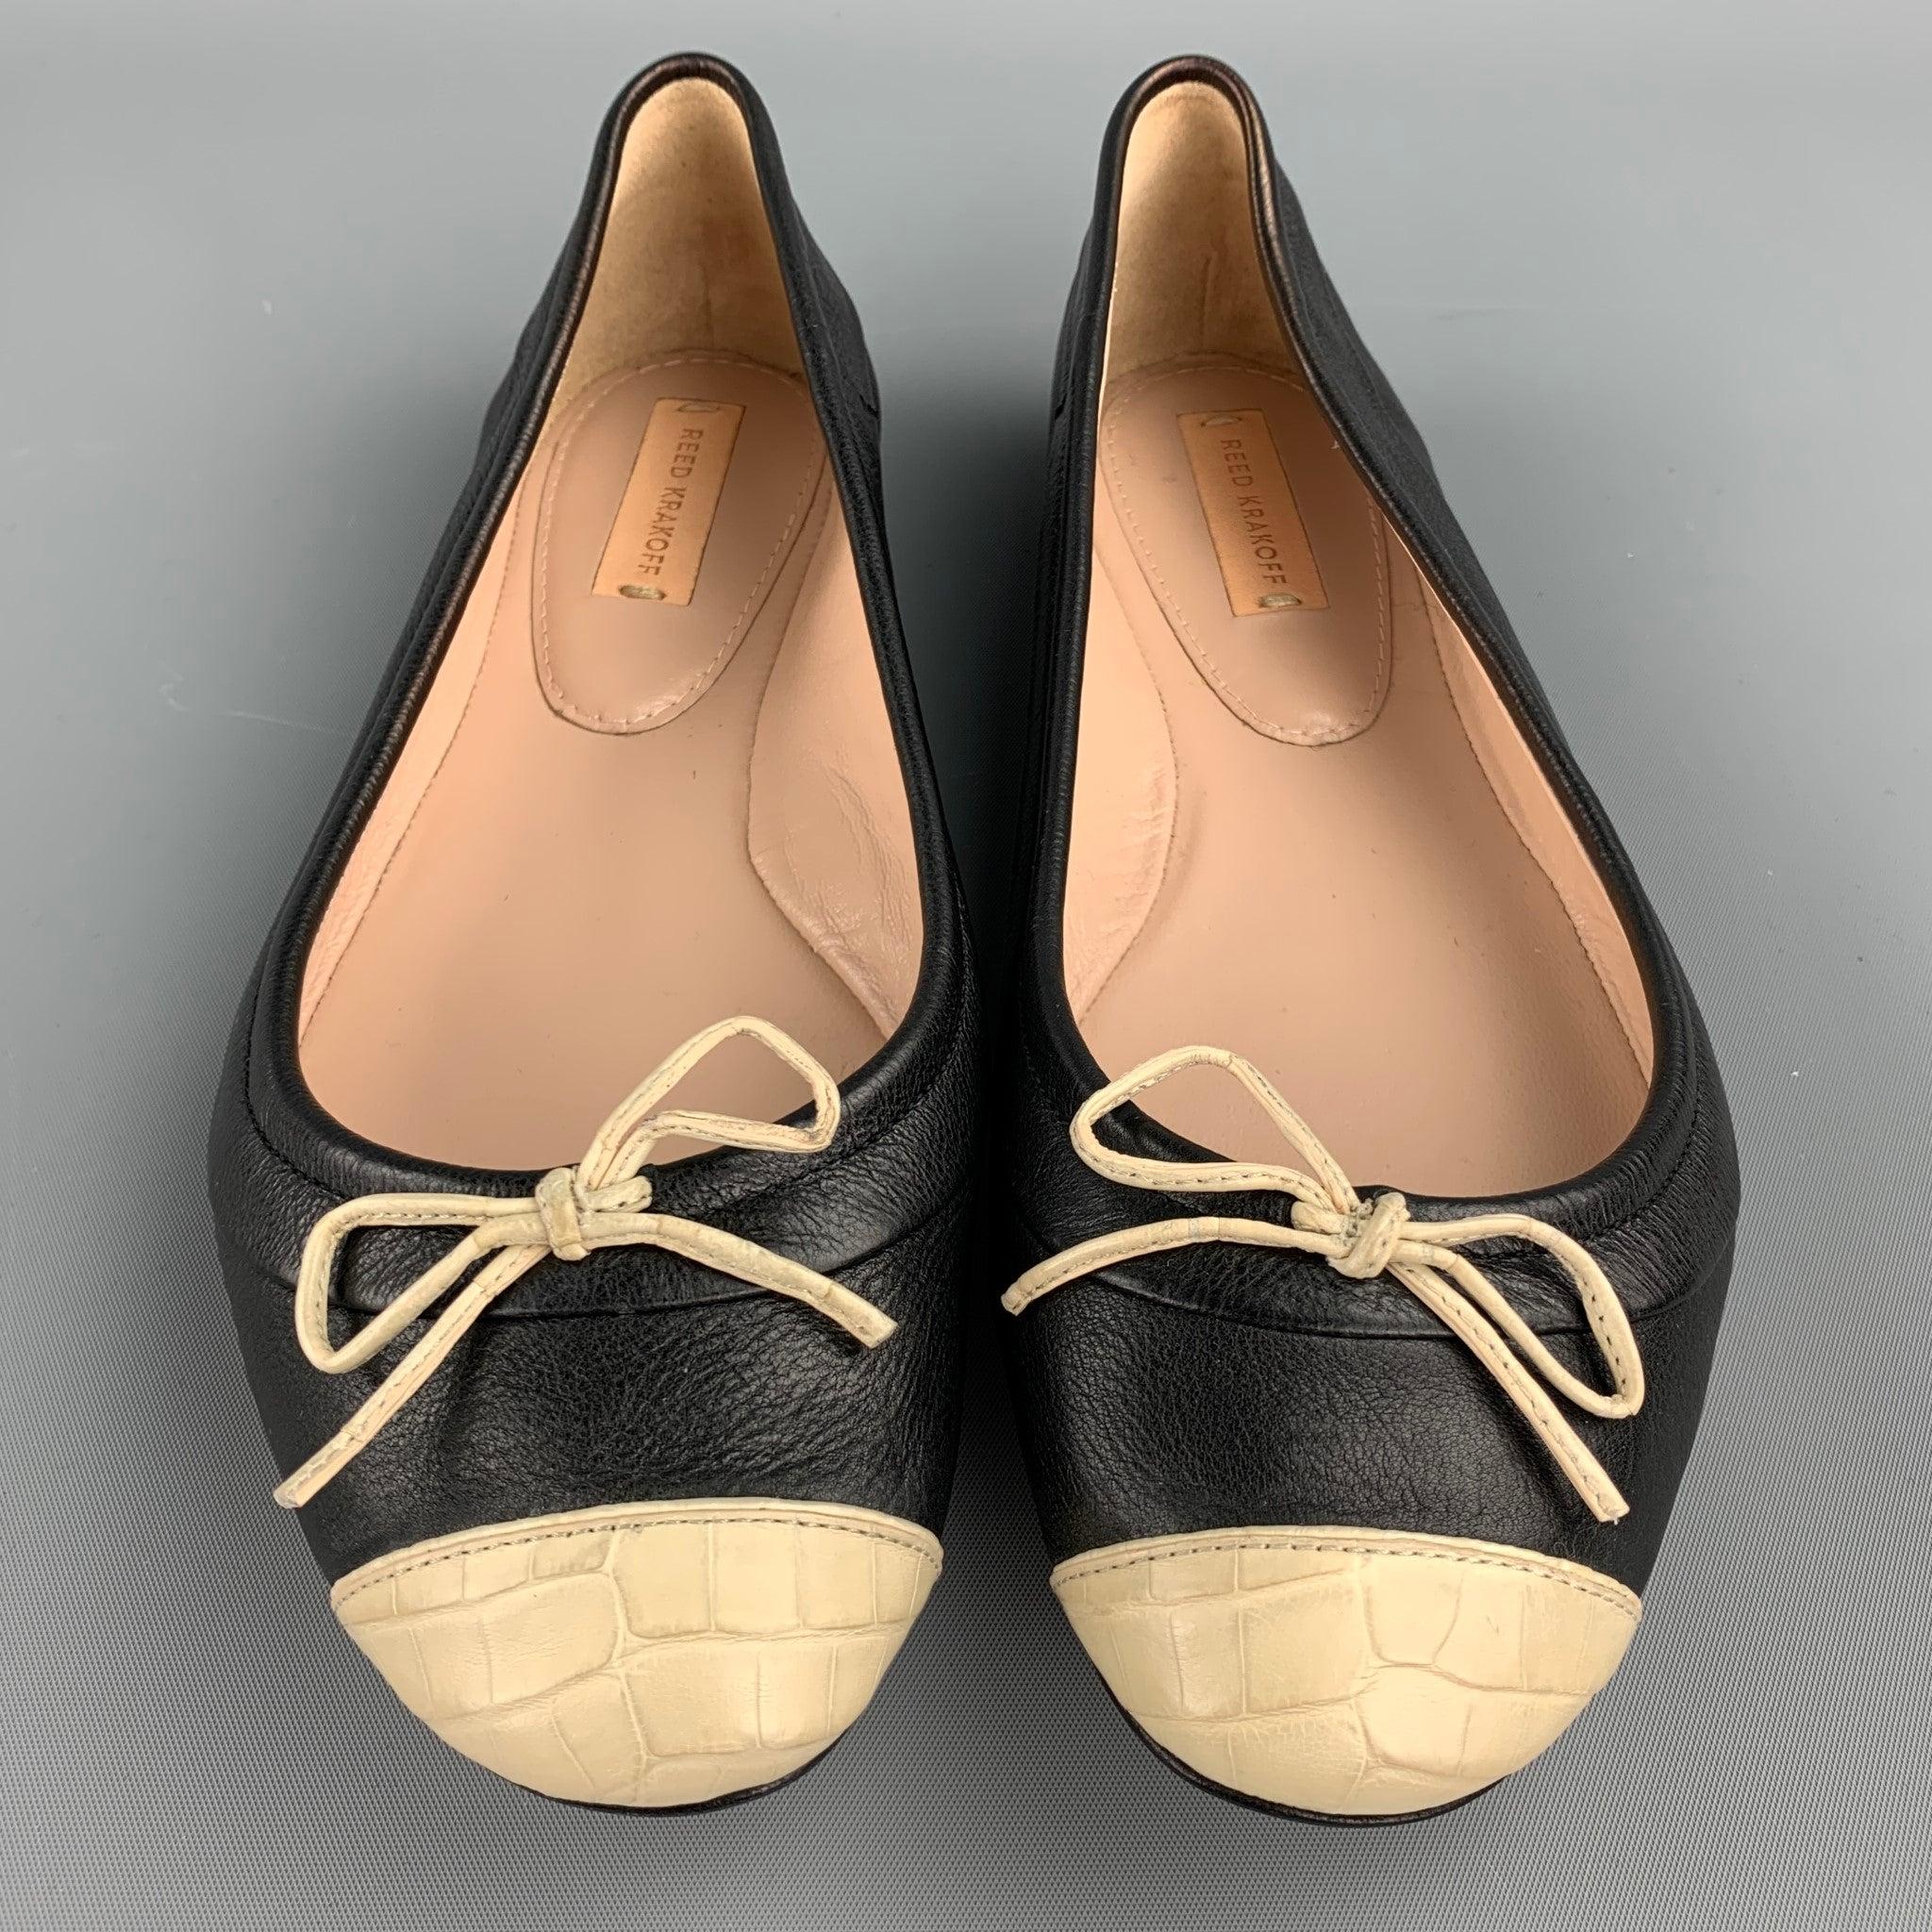 REED KRAKOFF flats comes in a black leather with a beige alligator tip trim featuring a cap toe and a front bow detail. Comes with box. Made in Italy.Very Good Pre-Owed Condition.
 

Marked:   EU 37.5 

Measurements: 
  
9.5 inches  x 3 inches 
  
 